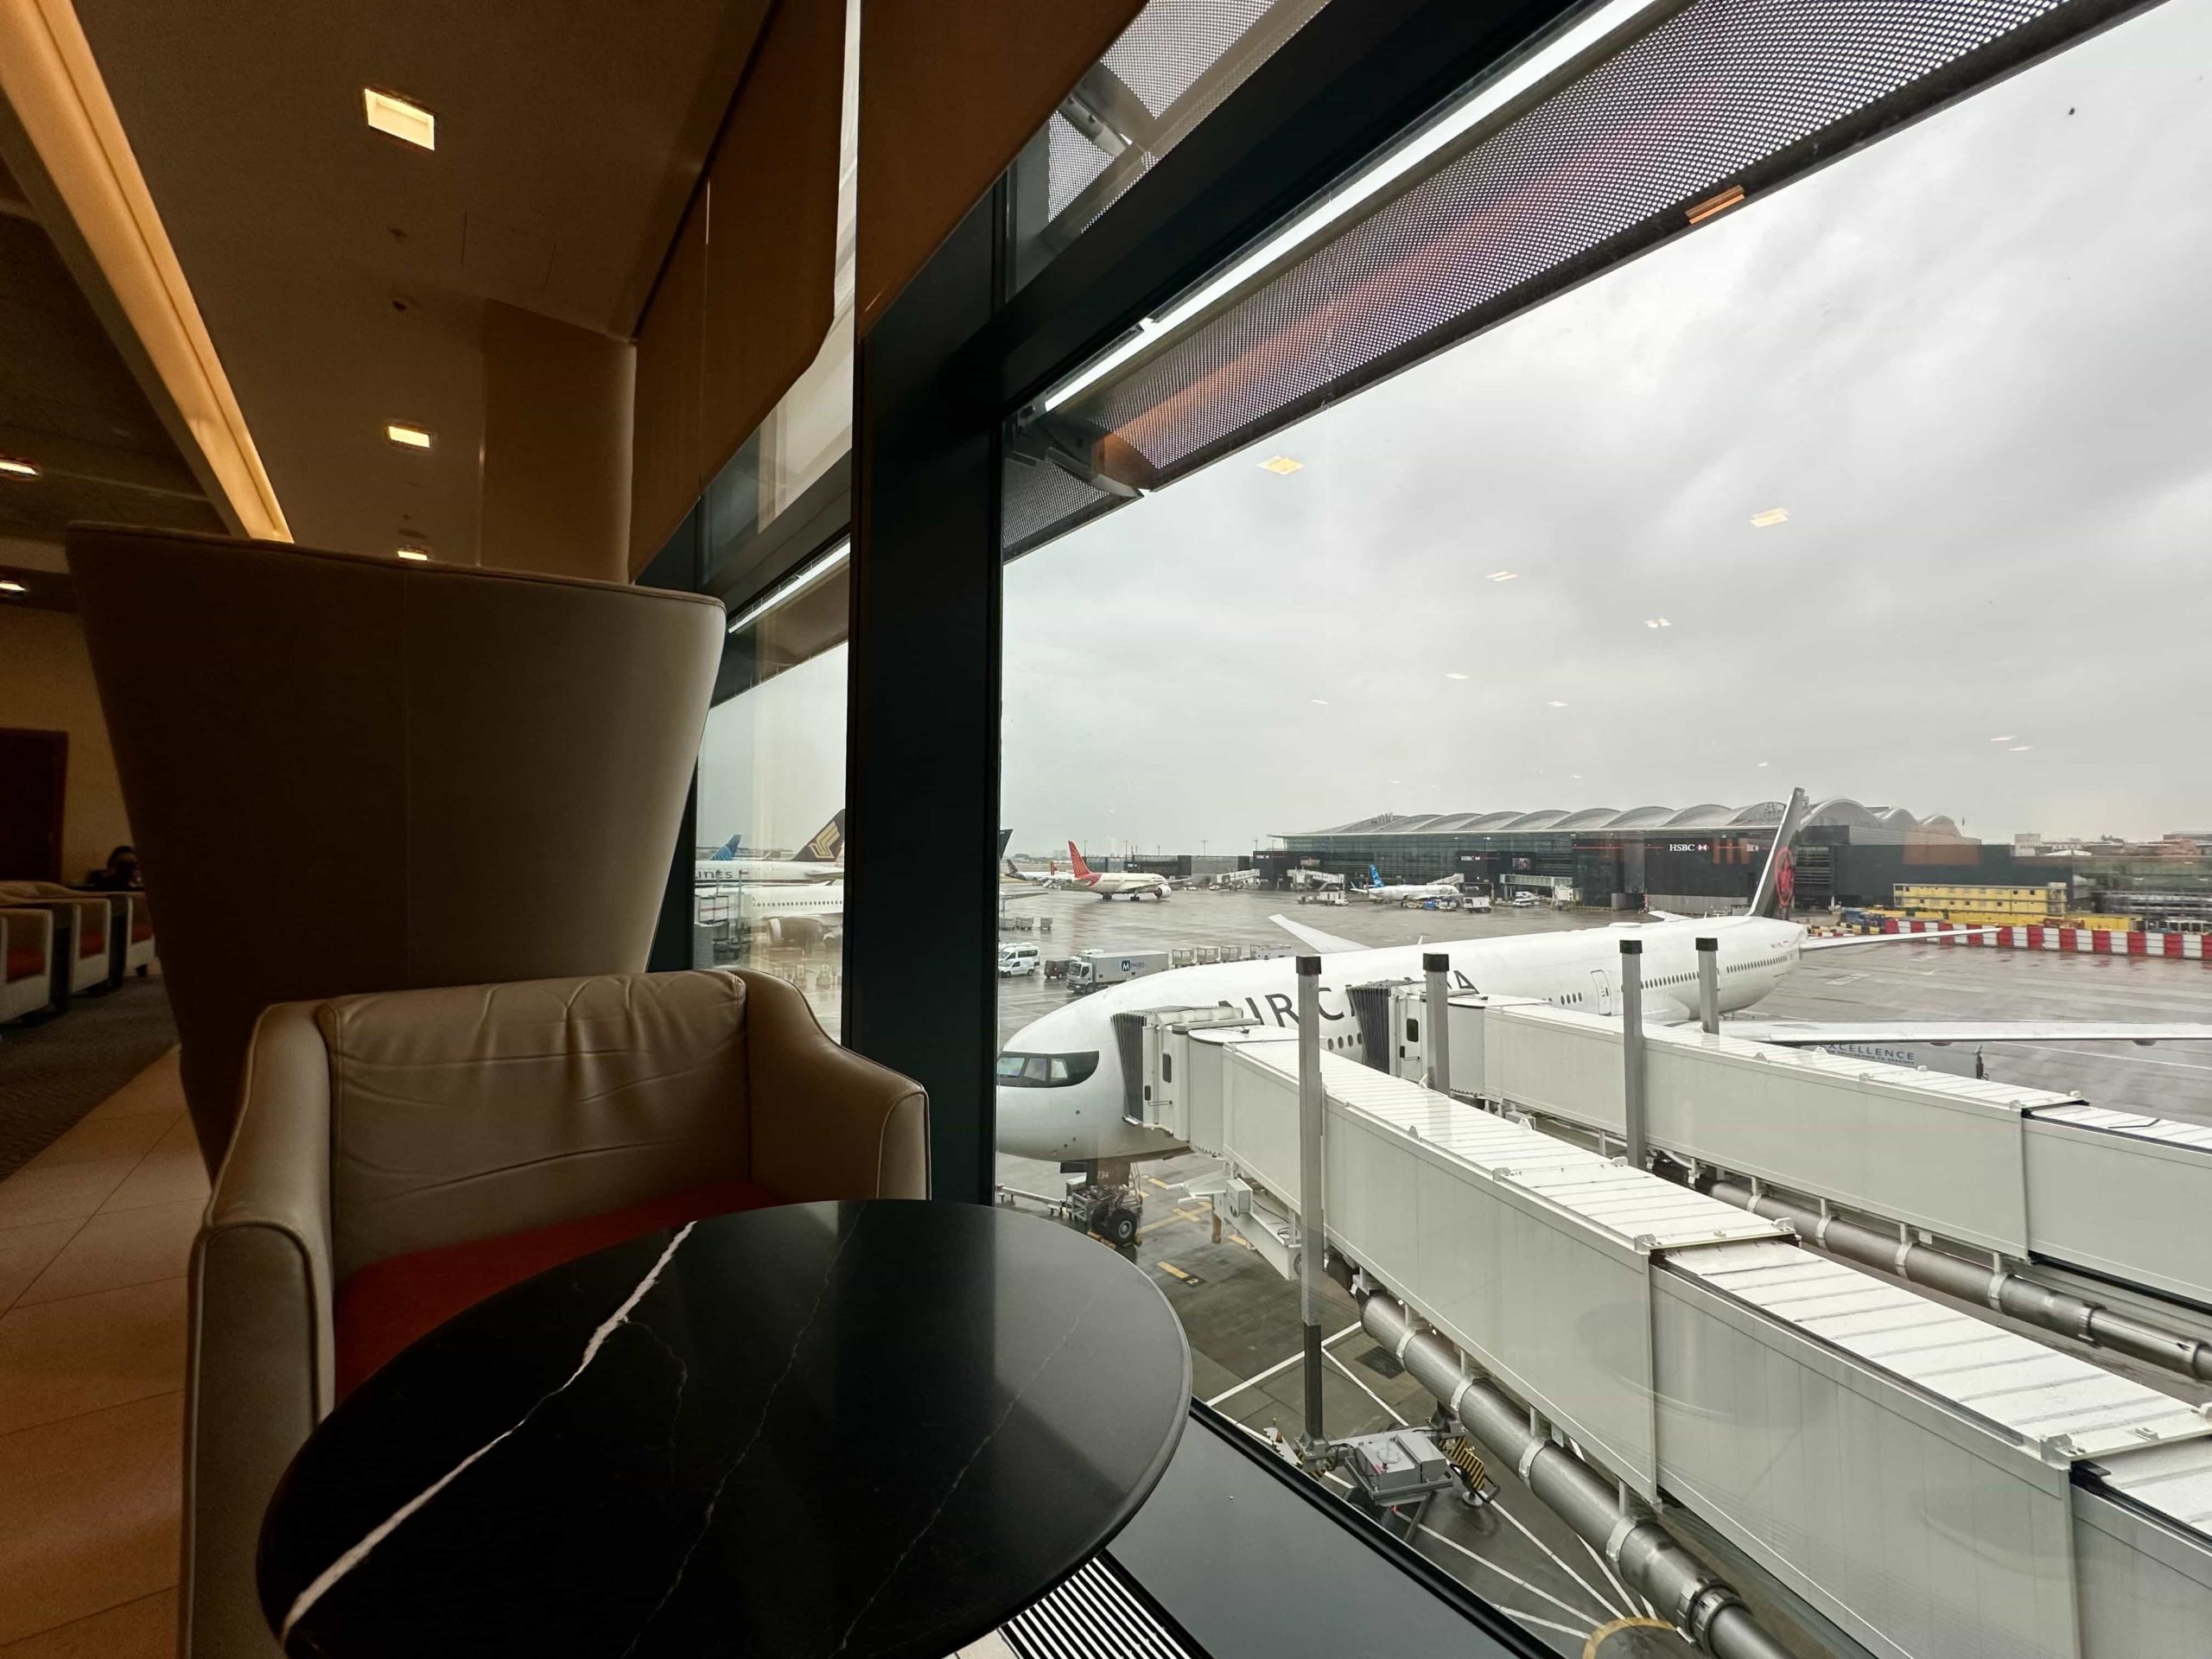 A coffee table setup overlooking a jet bridge and the apron below